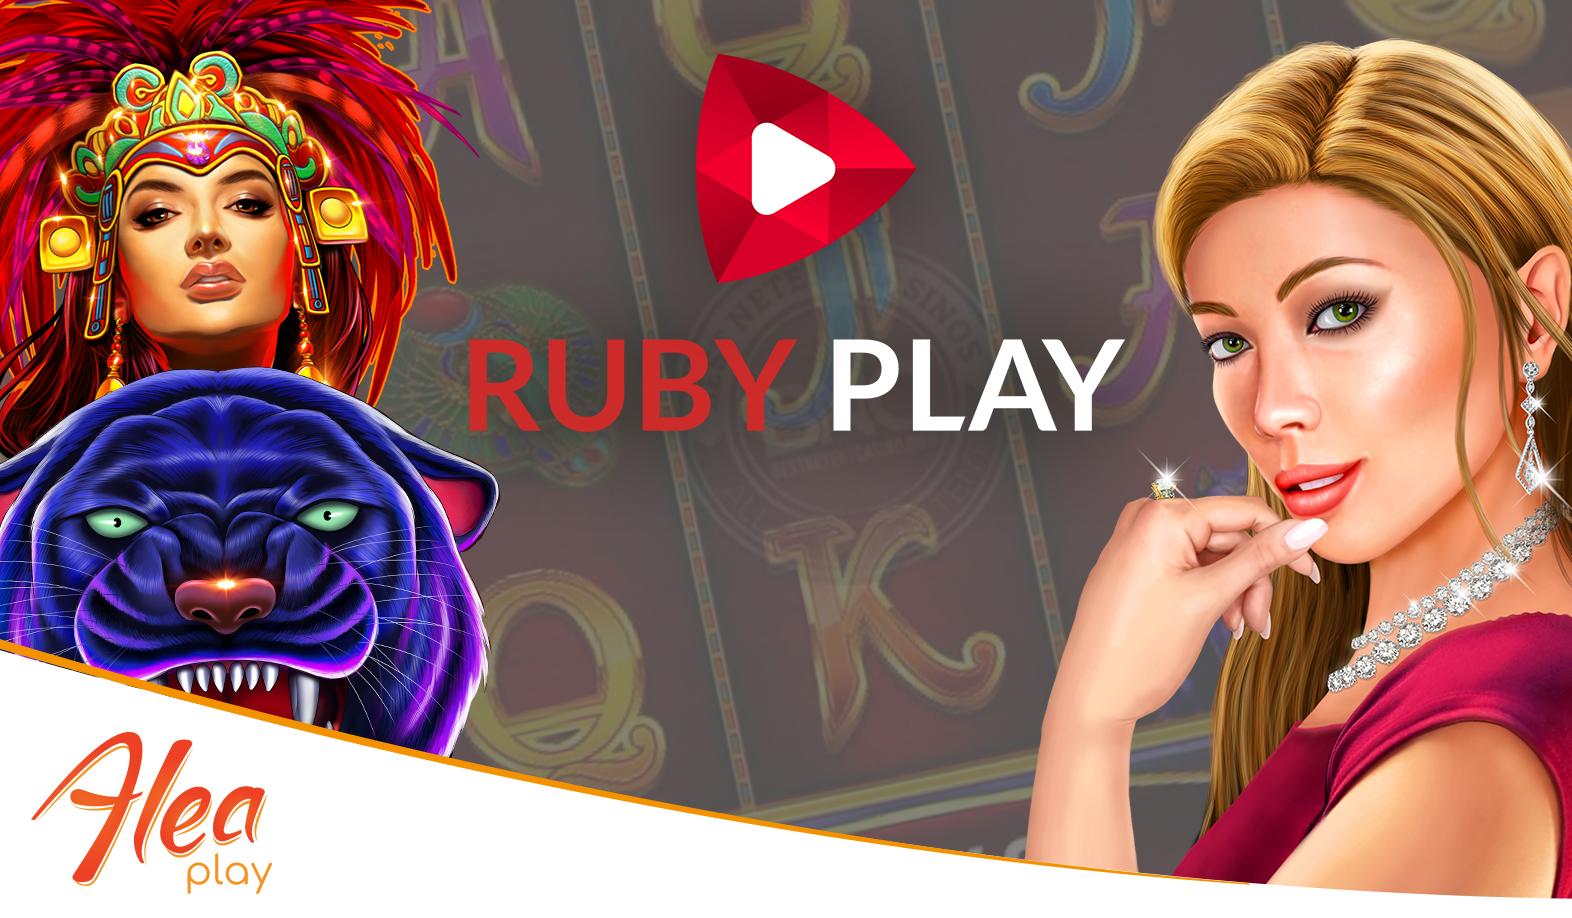 Alea Play is now live with Ruby Play | Alea